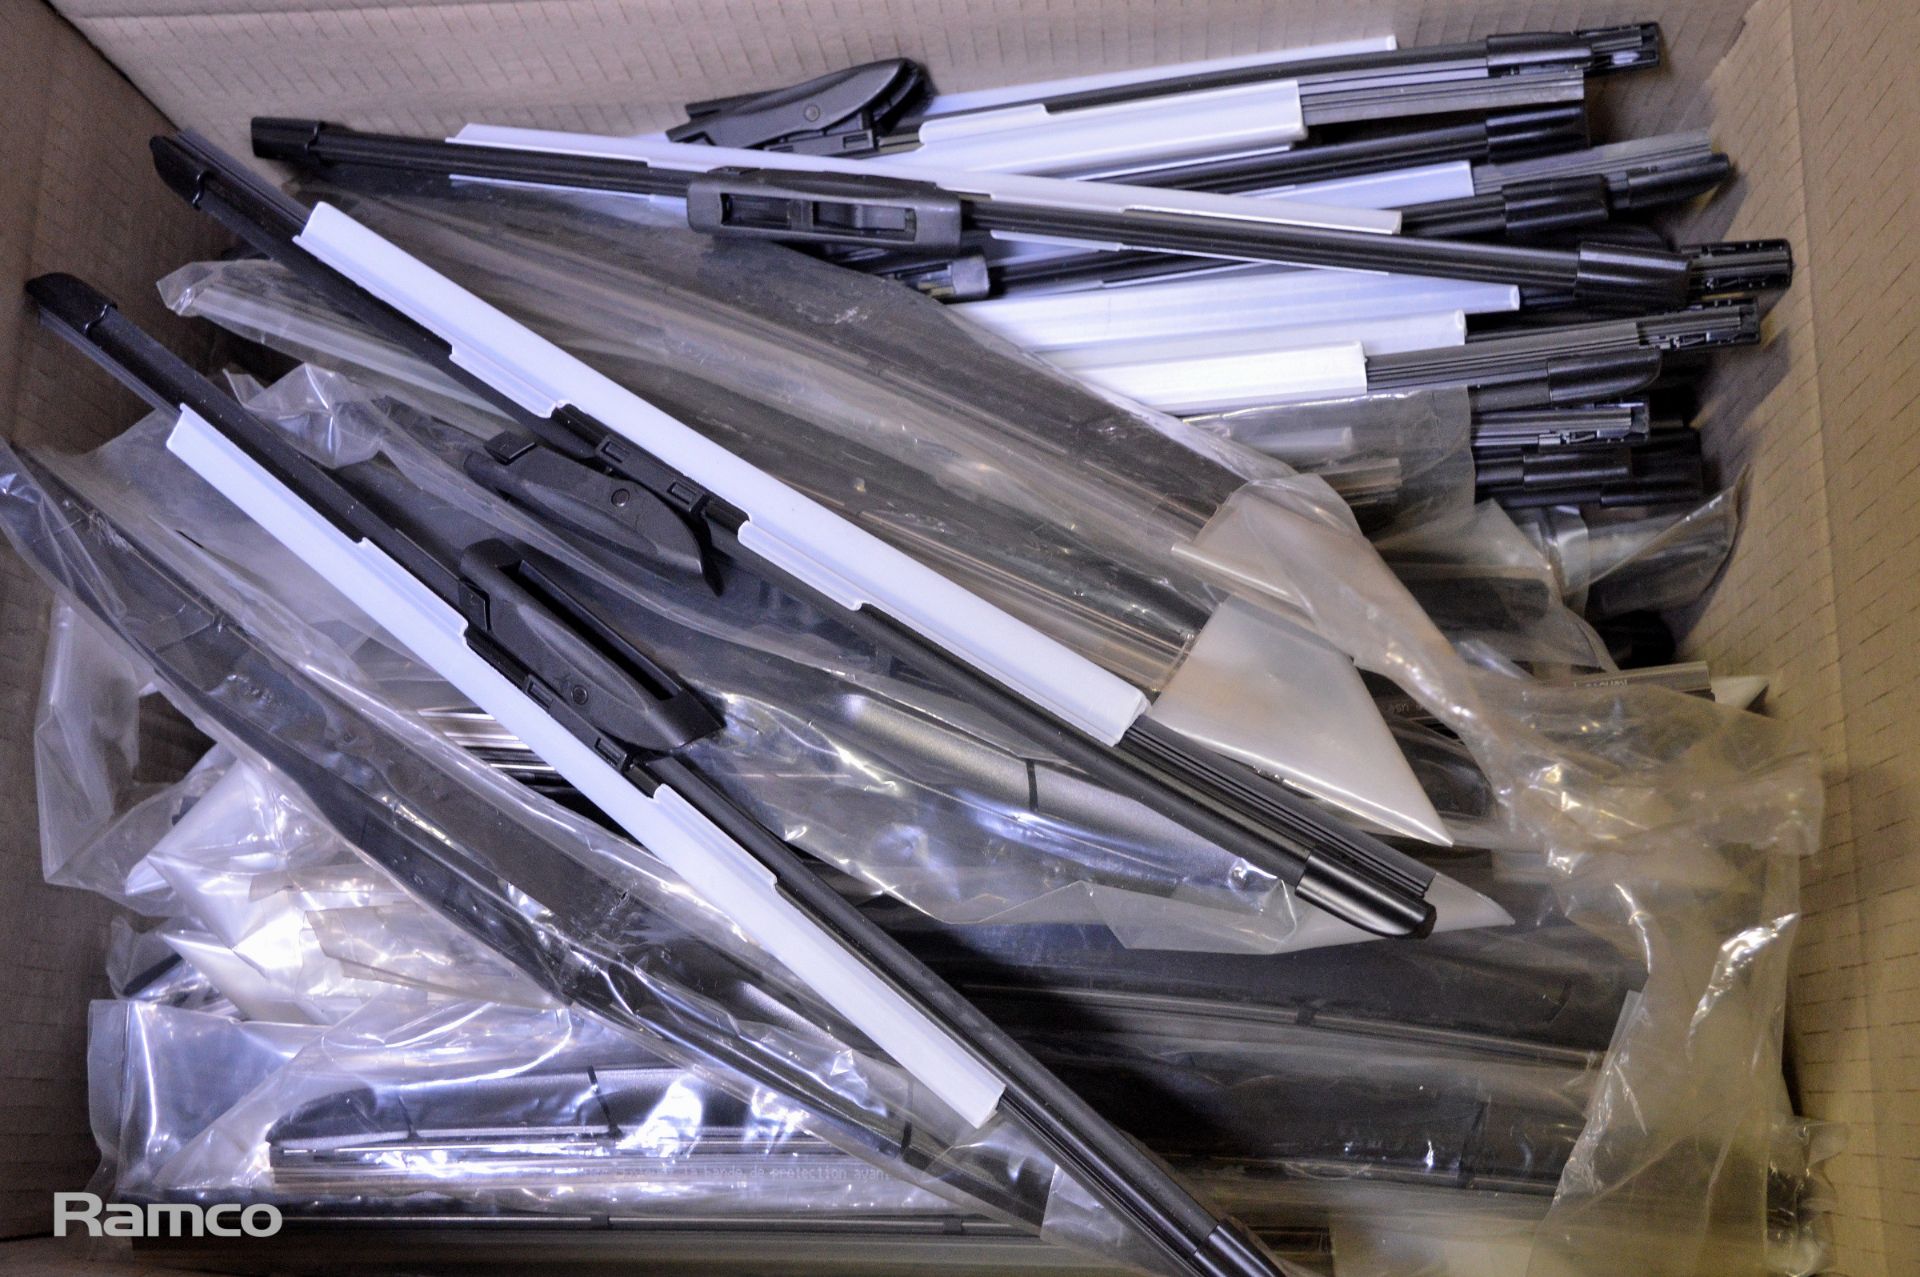 100x 16-18 inch Window Wipers - Image 2 of 2